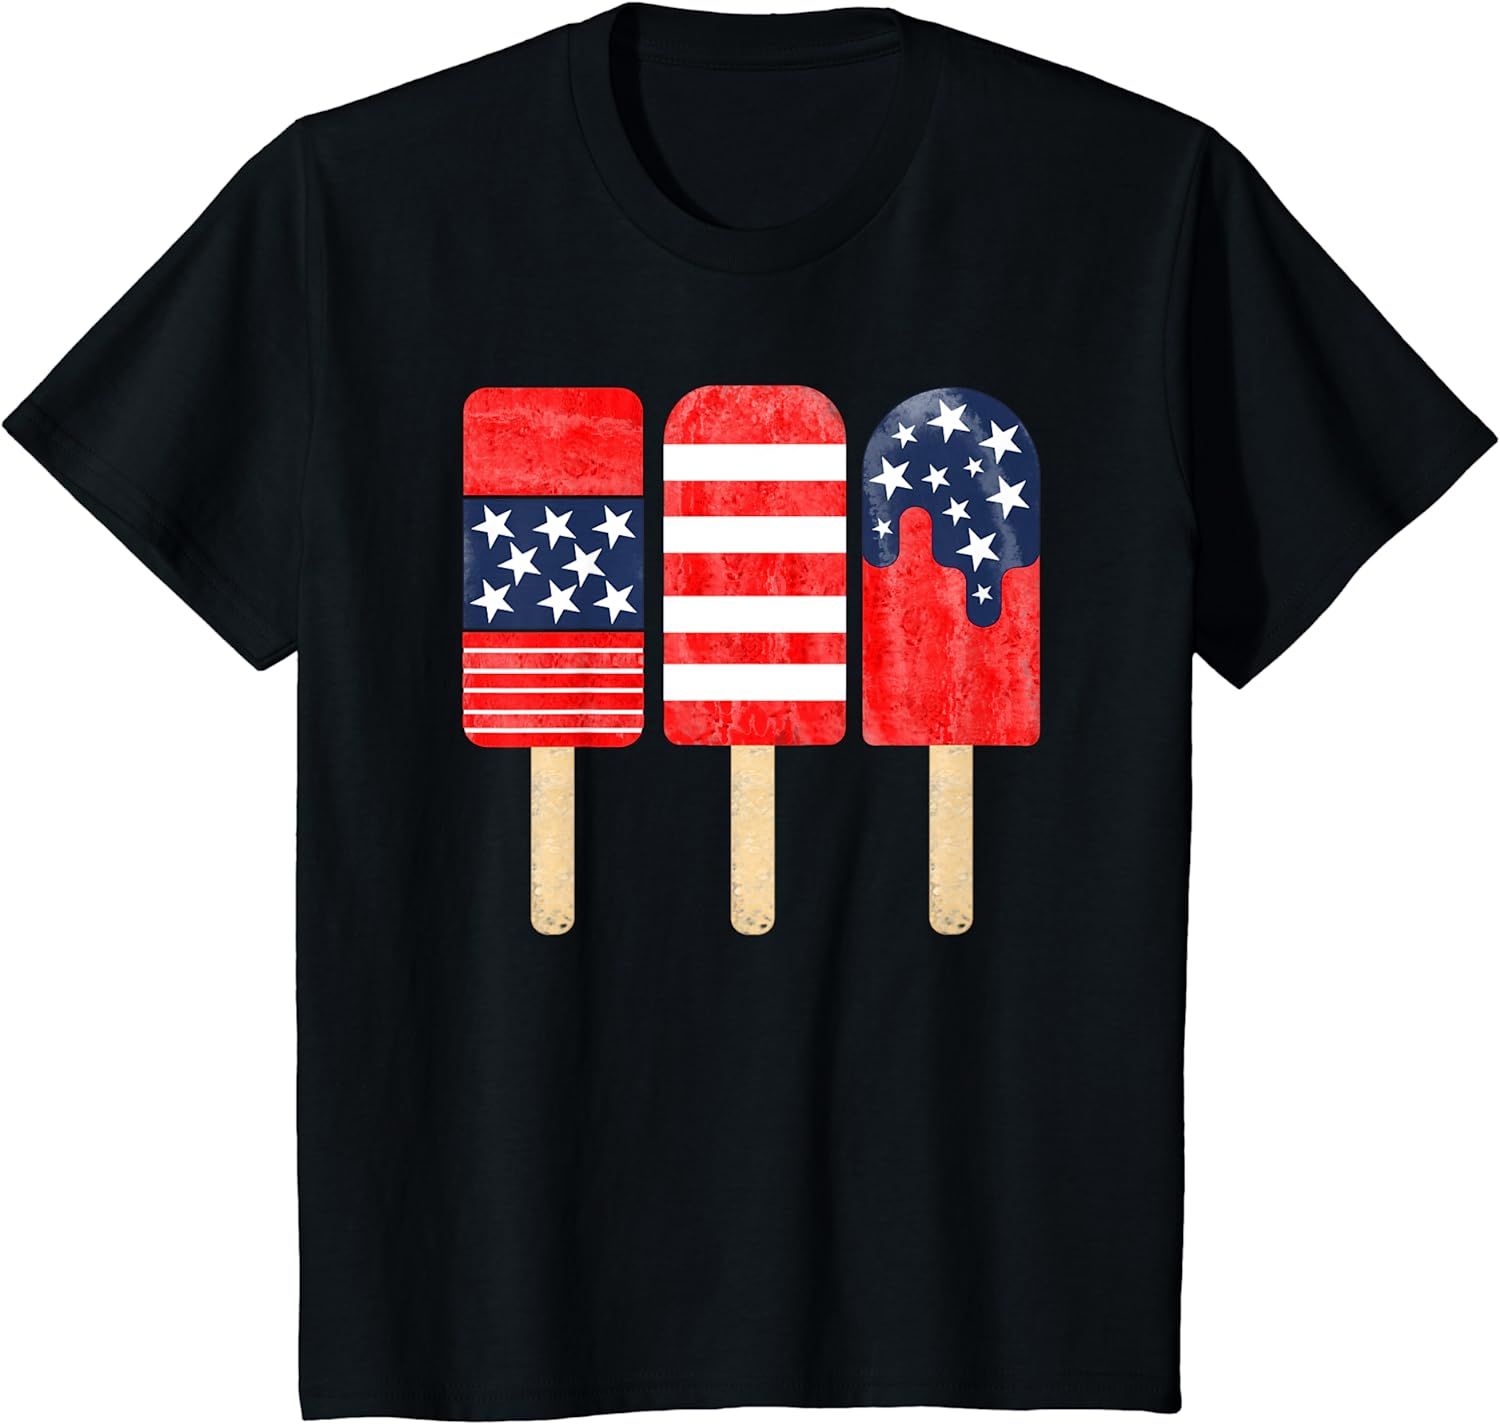 4th of July Popsicle Red White Blue American Flag Patriotic T-Shirt | Amazon (US)